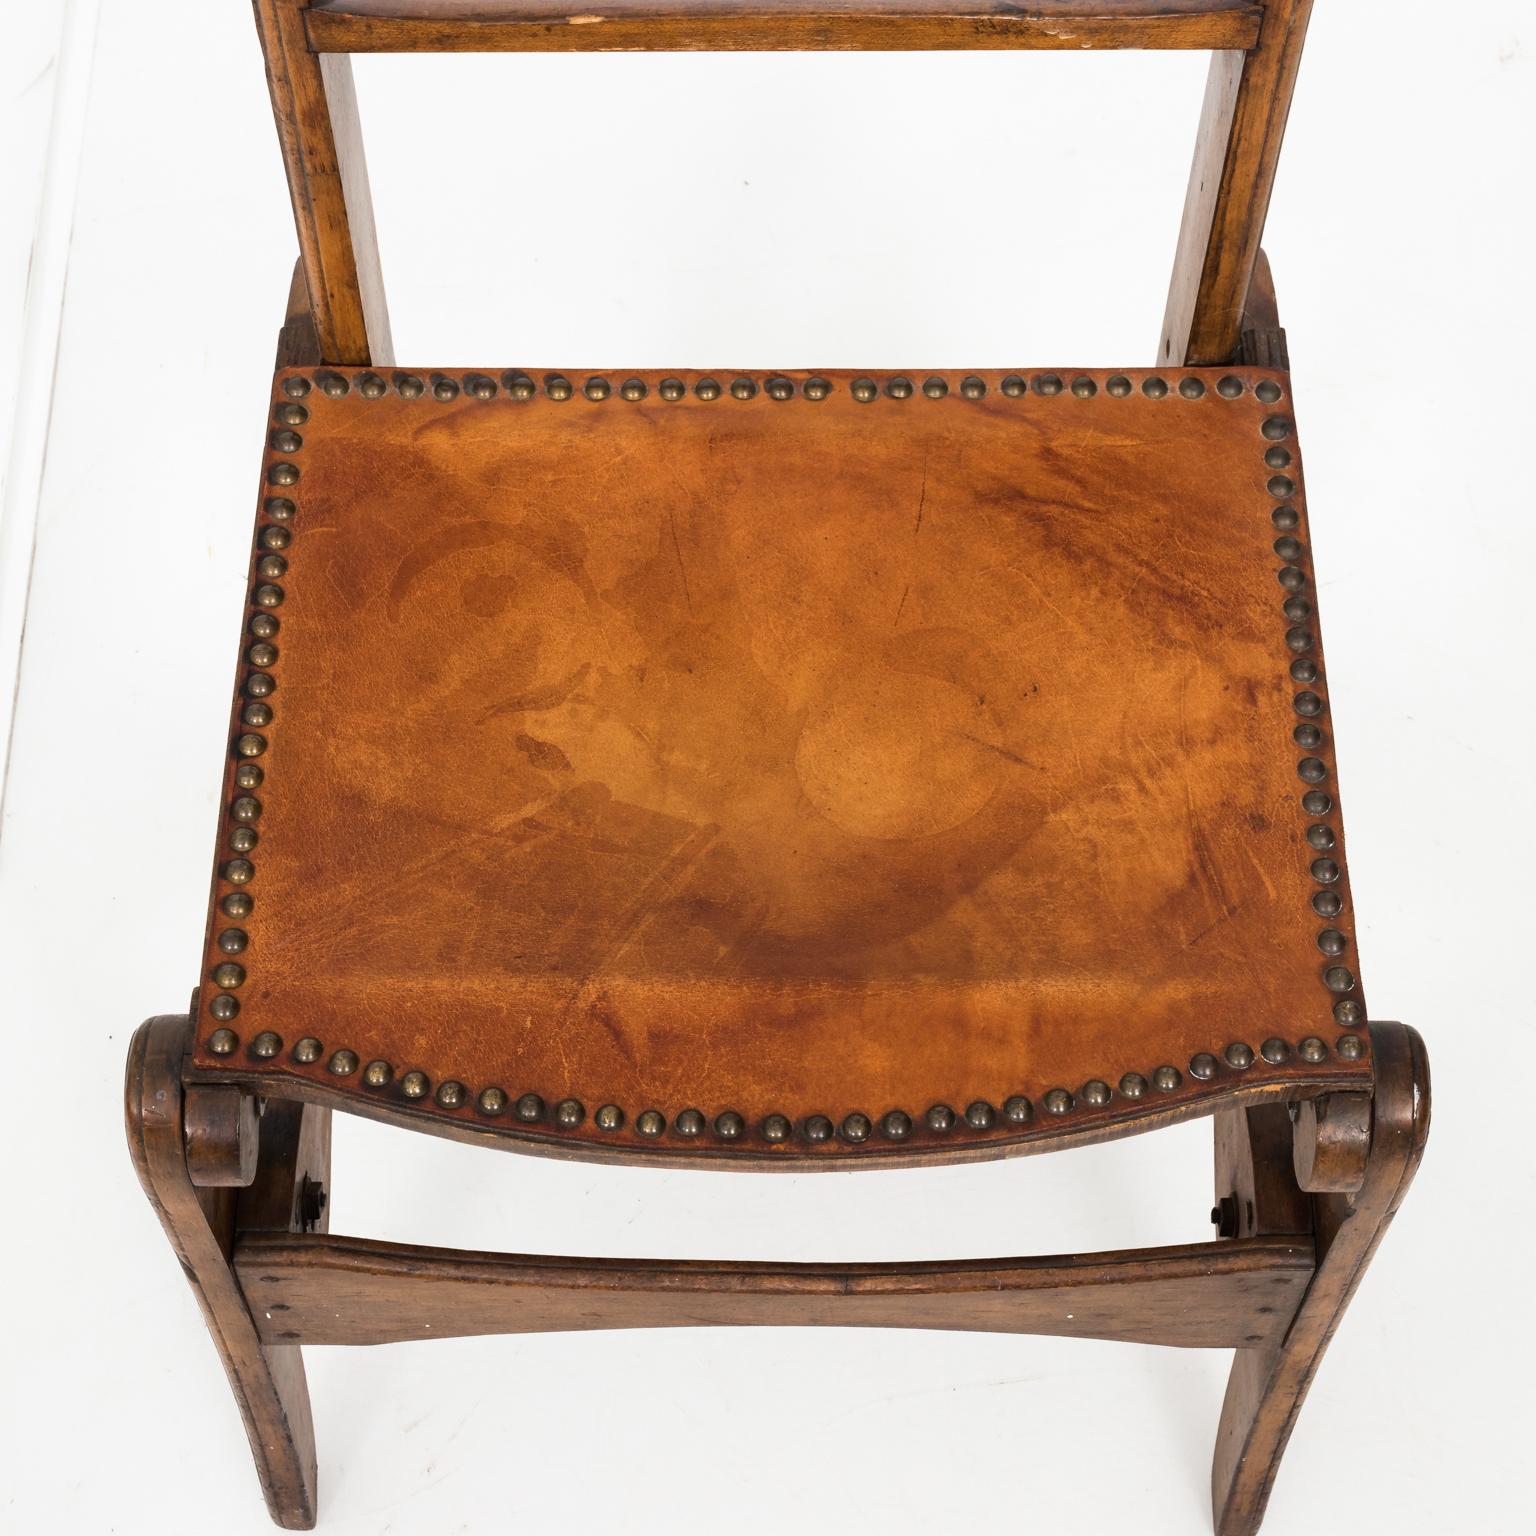 Folk Art chair from England constructed from a box crate with simple, curved back splat and box stretcher, circa early 20th century.